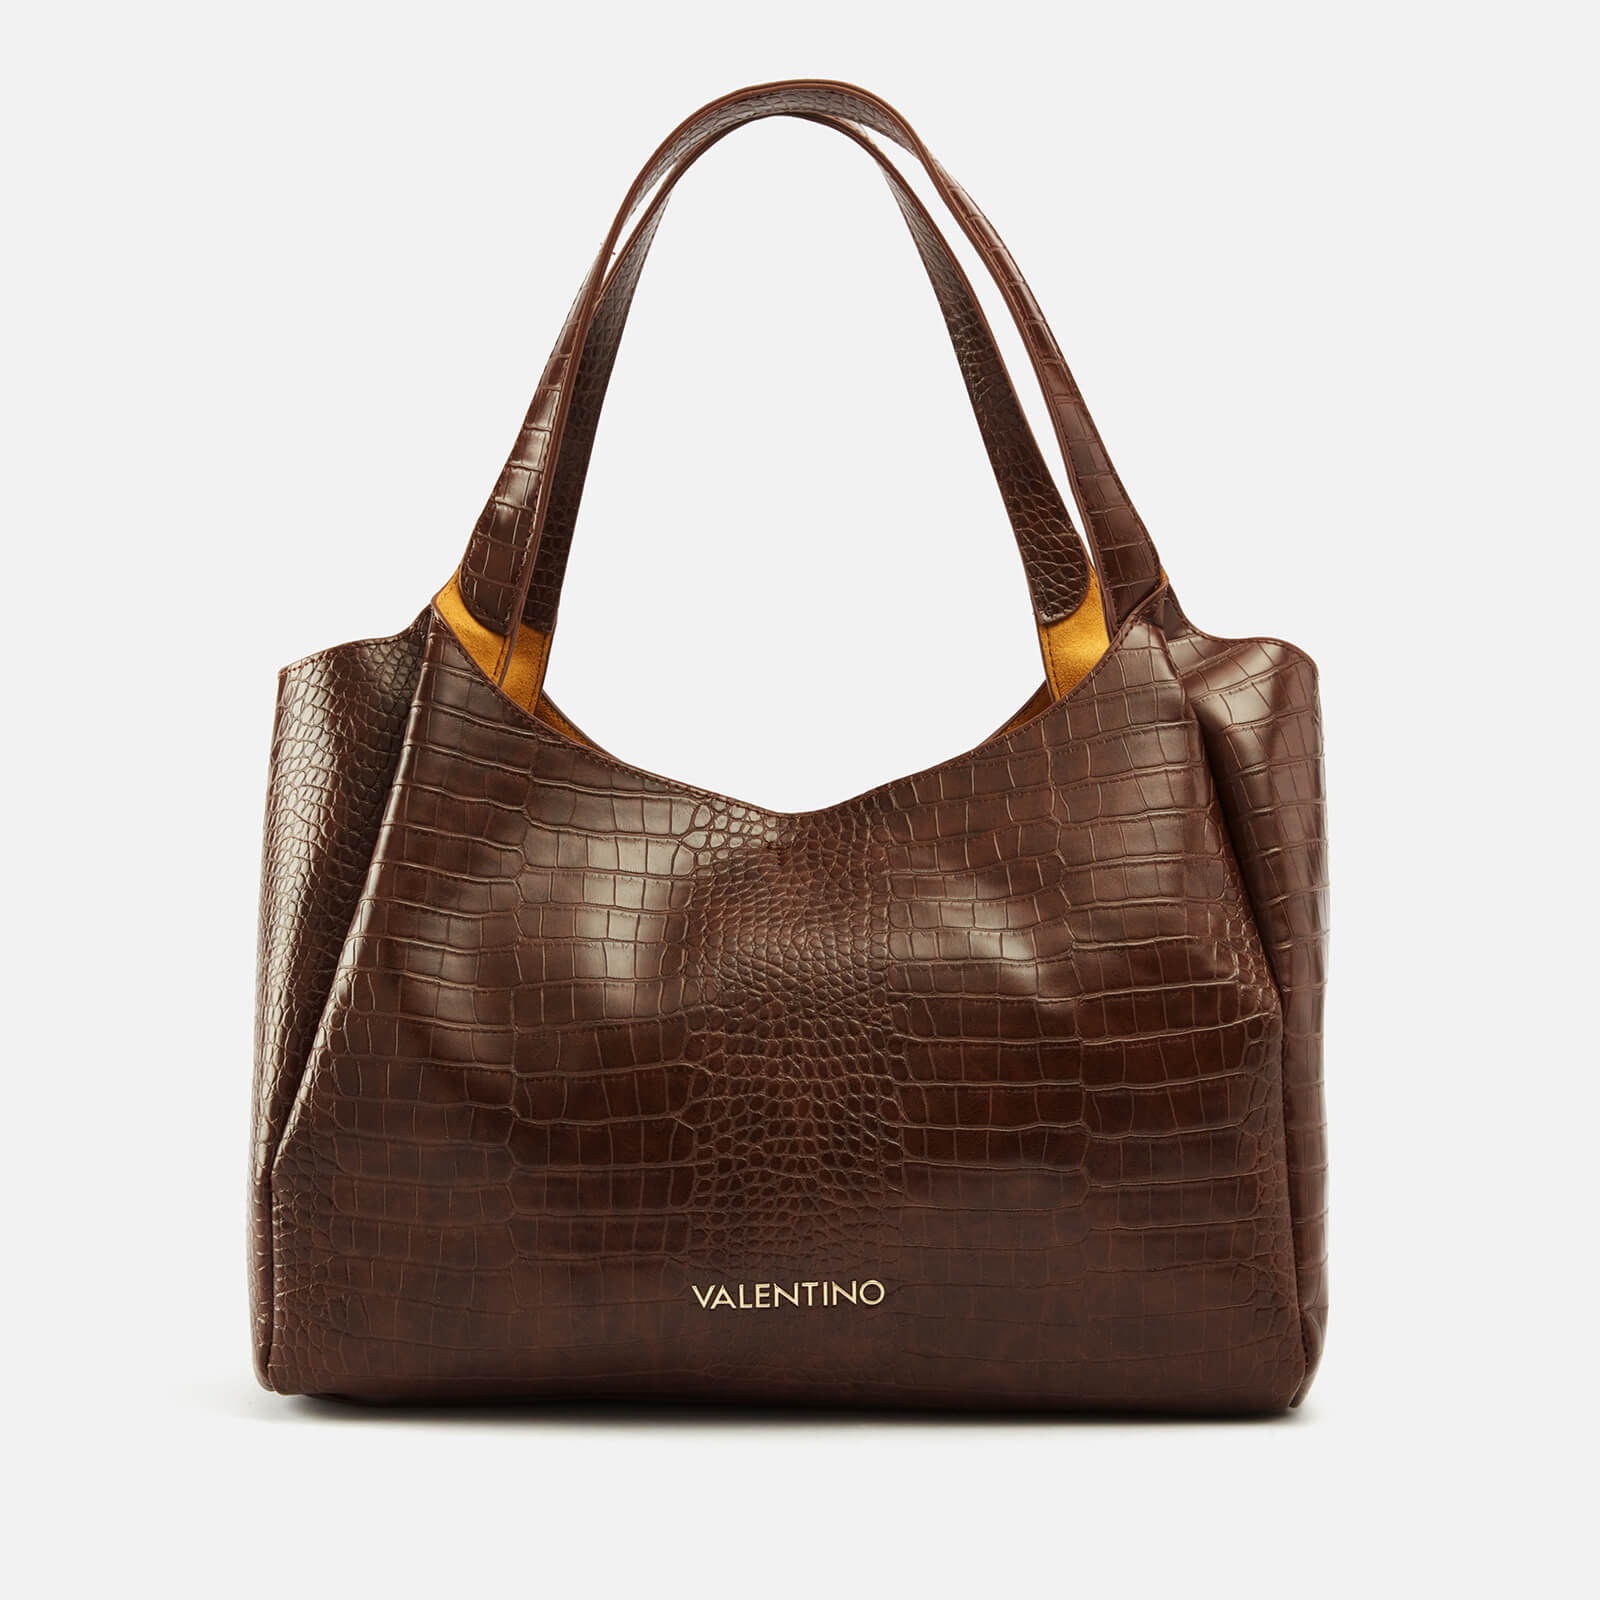 Valentino Wool Faux Croc Effect Leather Tote Bag product